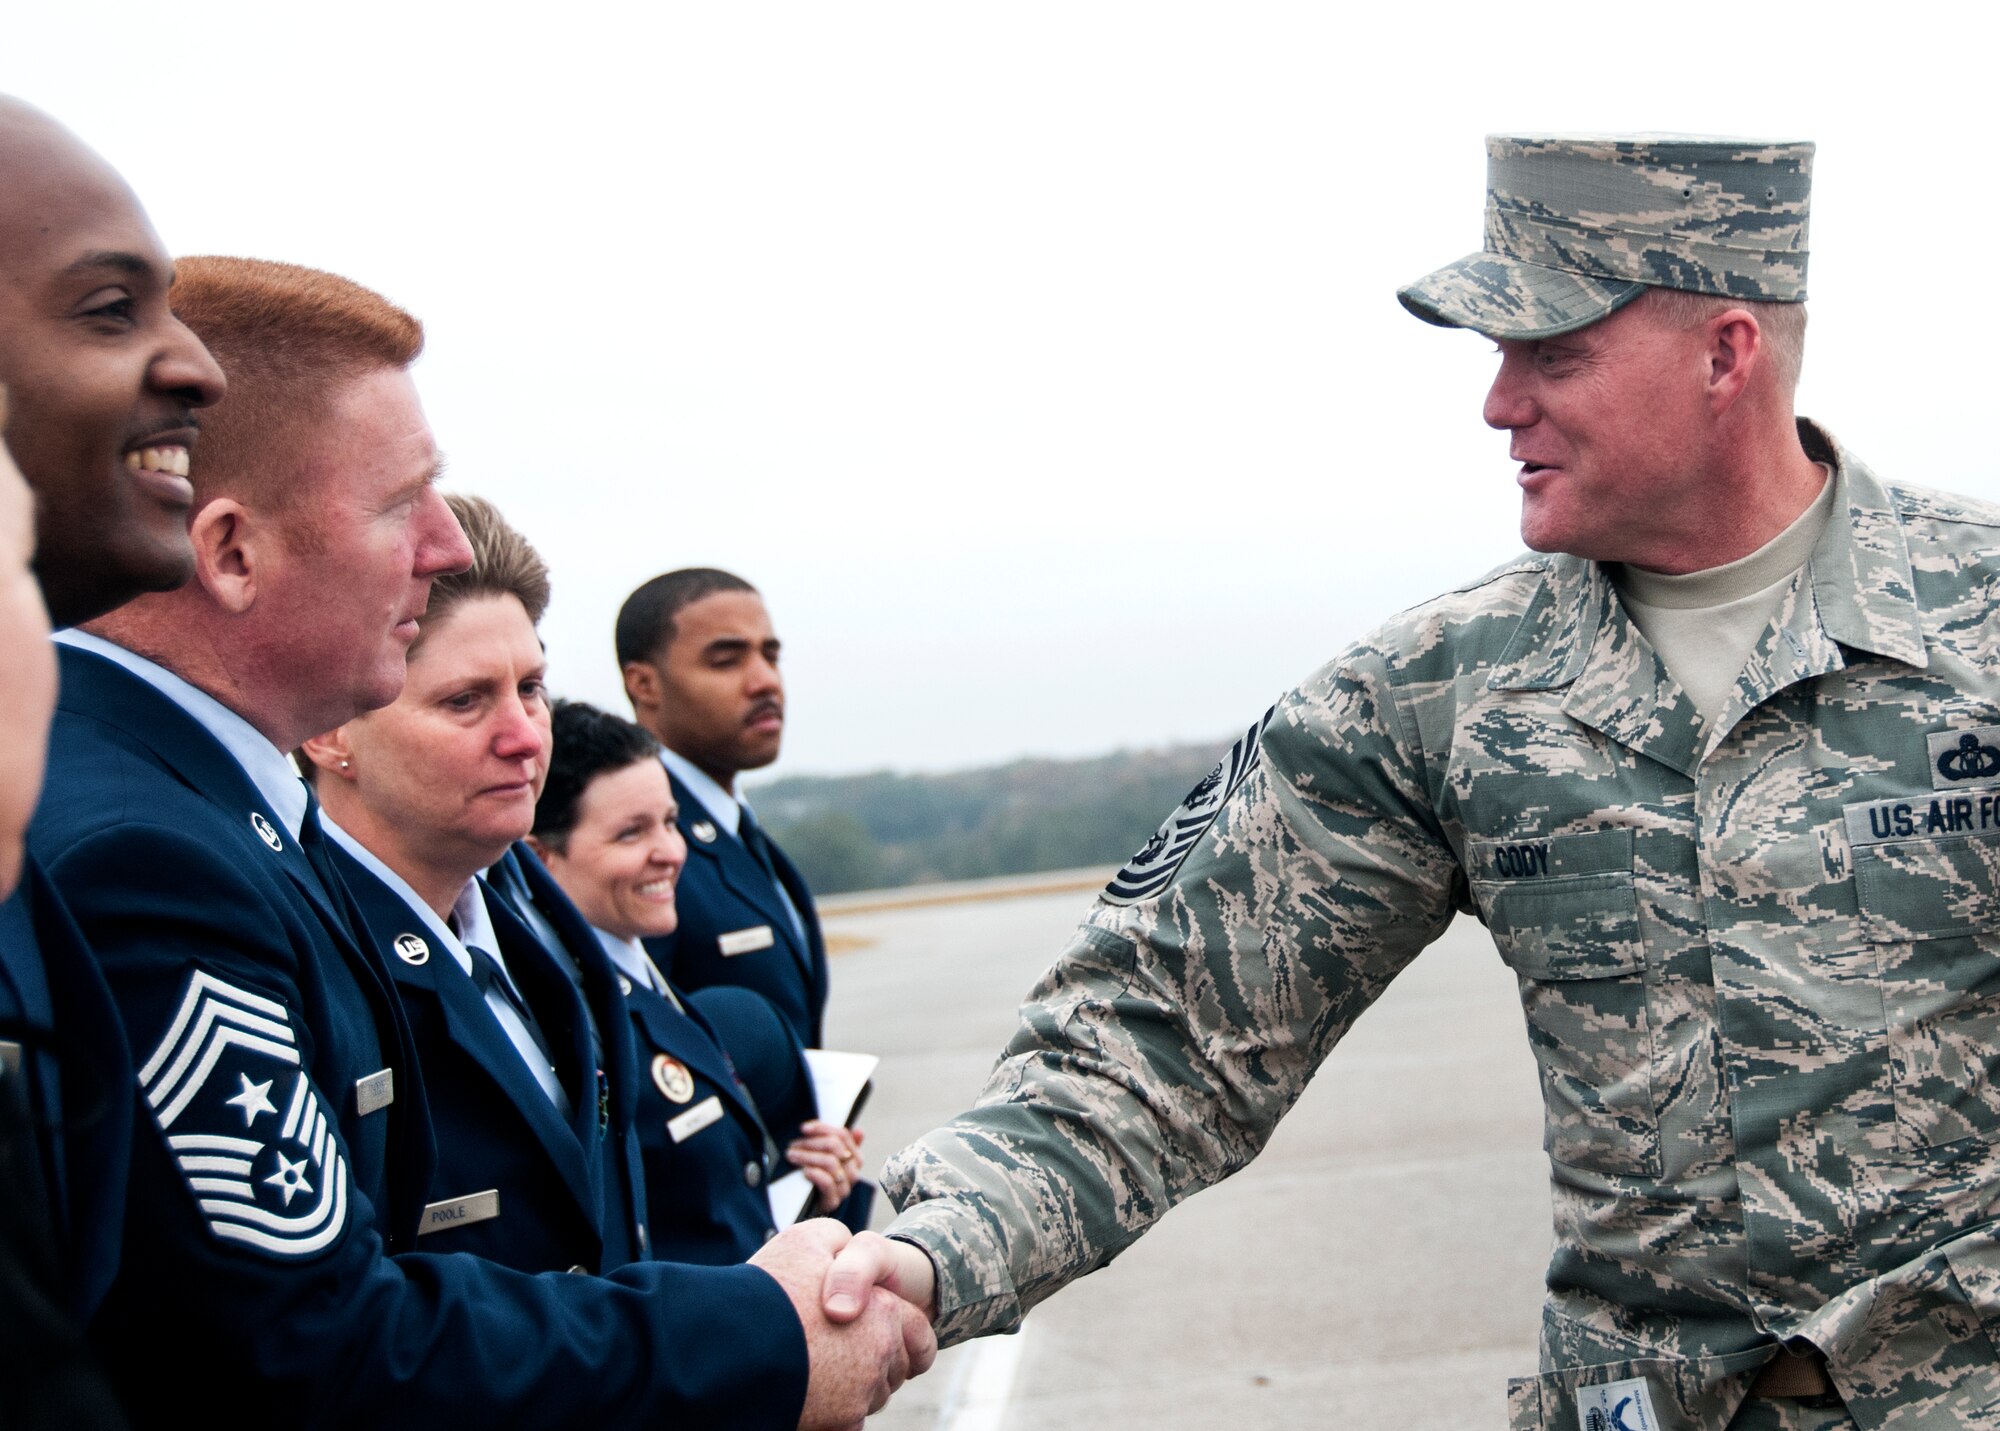 Chief Master Sgt. of the Air Force James A. Cody greets Air Force Reservists on the flightline of Dobbins Air Reserve Base, Ga. prior to his speaking engagement with the Atlanta Regional Military Appreciation Committee Nov. 17, 2014. Cody visited the ARMAC in Marietta, Georgia for its 62nd annual luncheon. (U.S. Air Force photo by Senior Airman Daniel Phelps/Released)